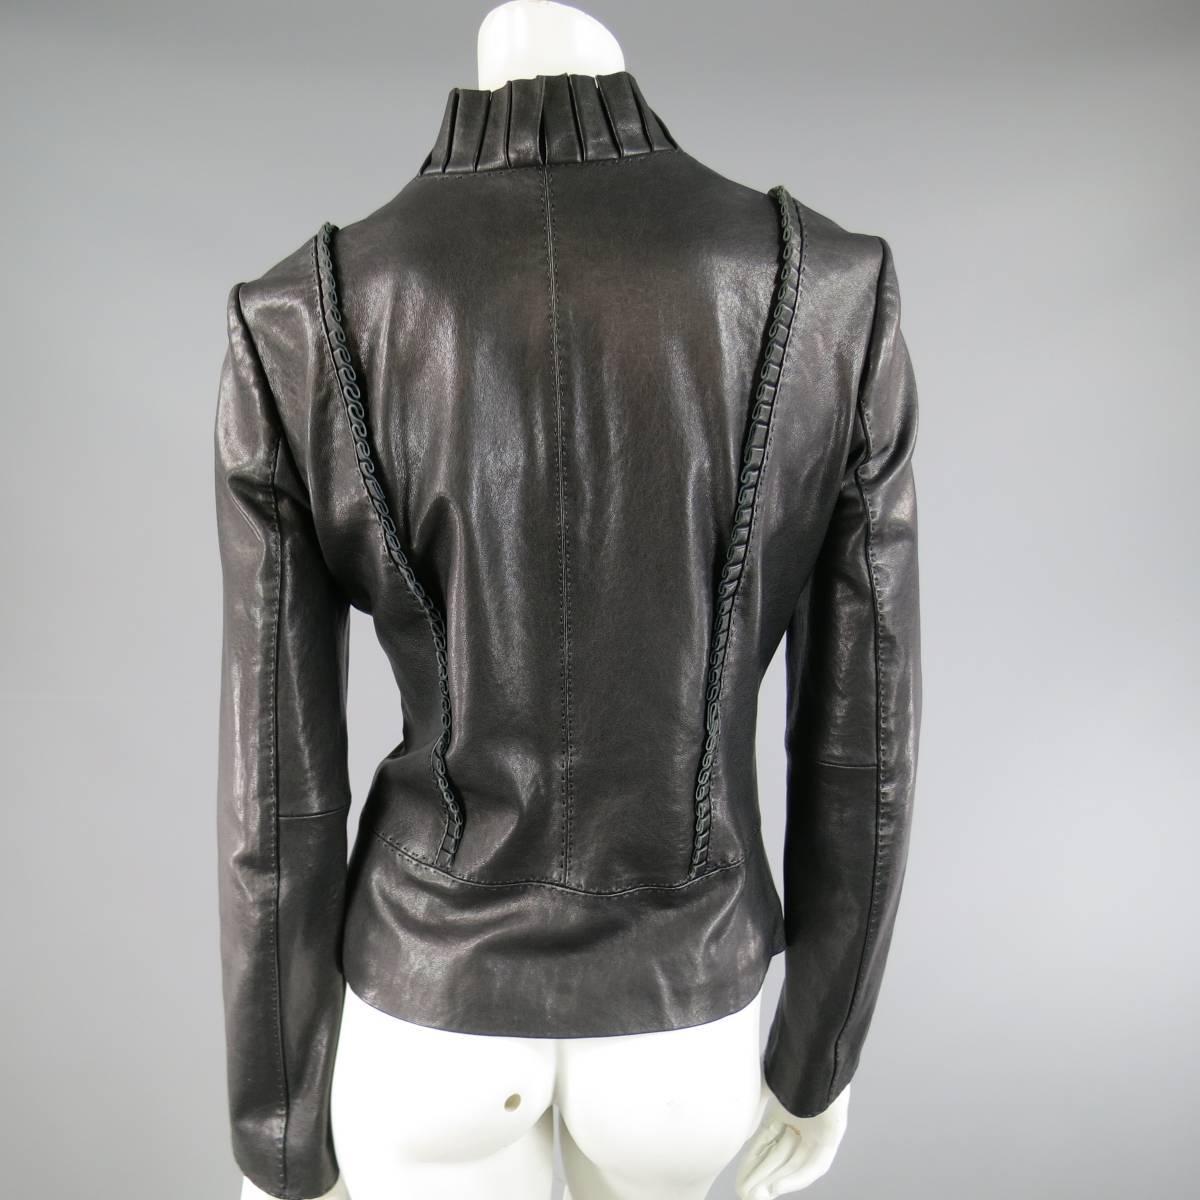 TORY BURCH Size 8 Black Pleated Ruffle Trim Leather Jacket at 1stdibs